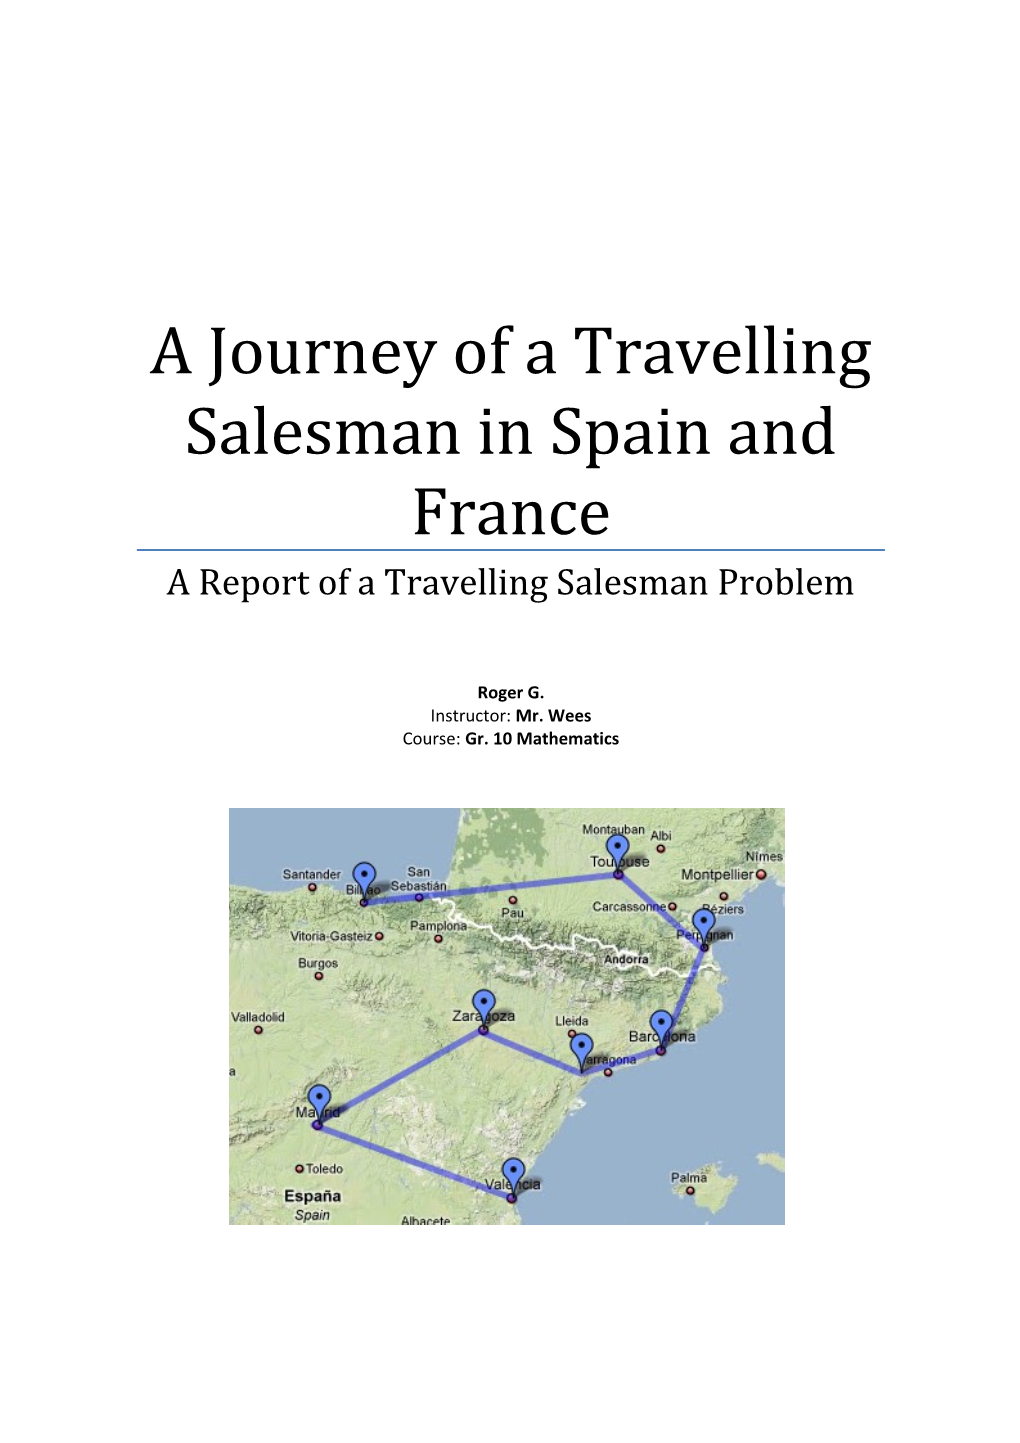 A Journey of a Travelling Salesman in Spain and France